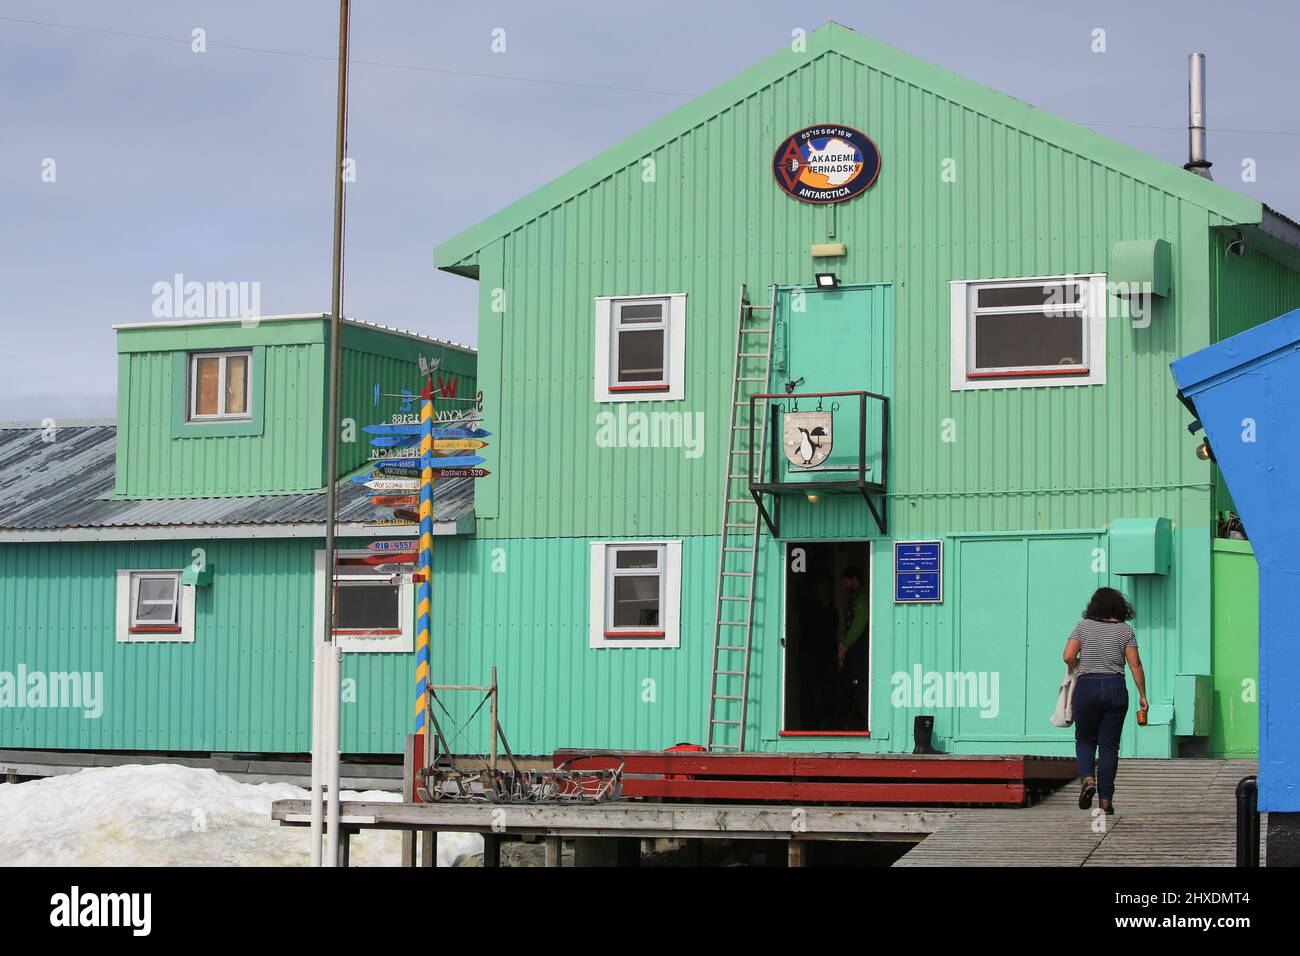 The Vernadsky Research Base is a Ukrainian Antarctic Station located on Galindez Island in the Argentine Islands, Antarctic Peninsula. Stock Photo